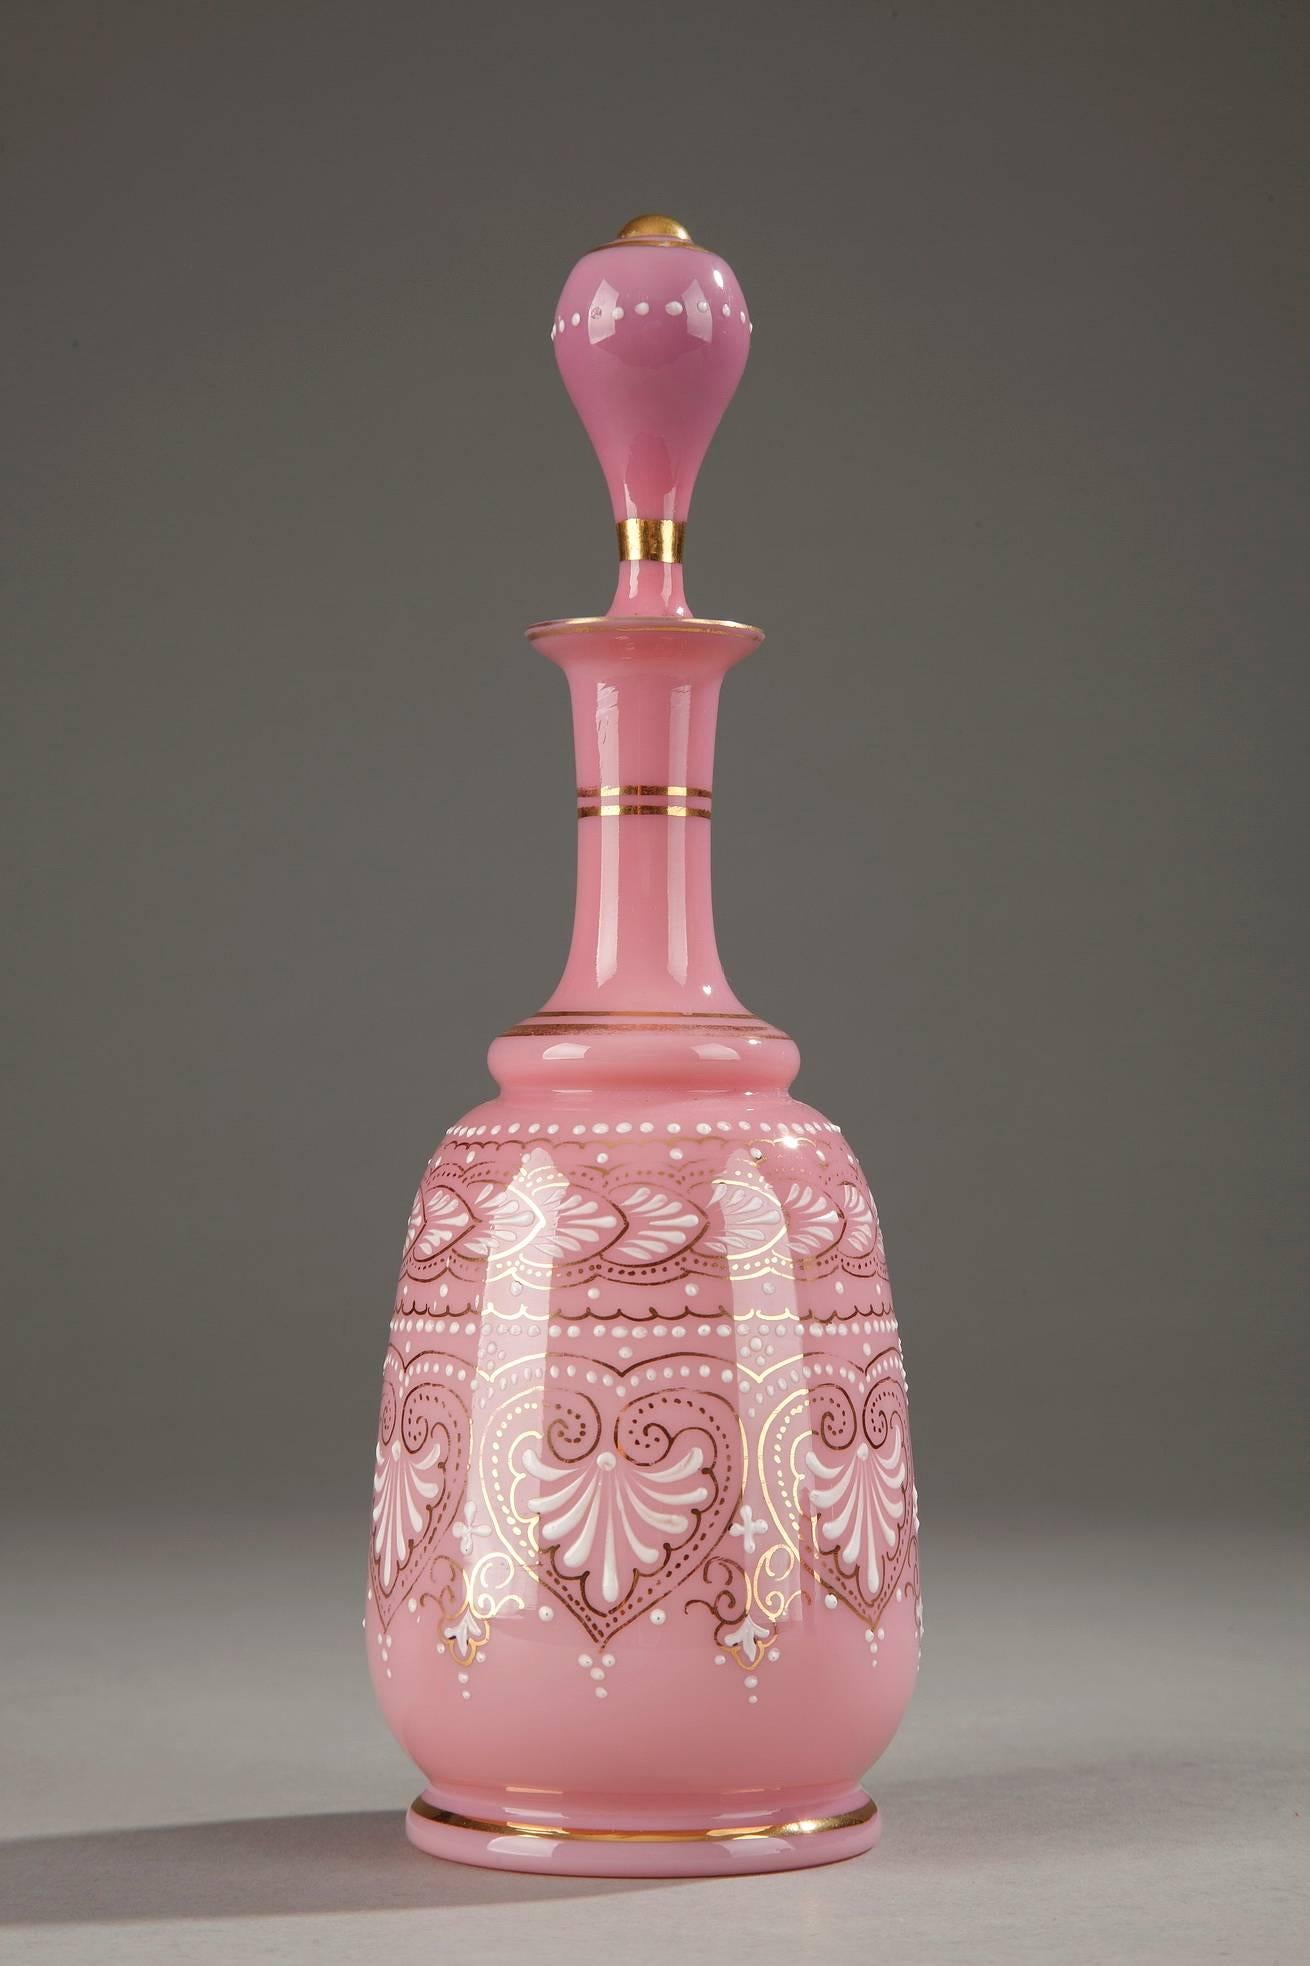 Pink opaline flask decorated in white enamel with palmettes, small dots and floral motifs. Gold bands accent the base and the neck. The stopper is topped with a ball. Very delicate enamel work. Probably baccarat,

circa 1850.

Dimensions: L 3